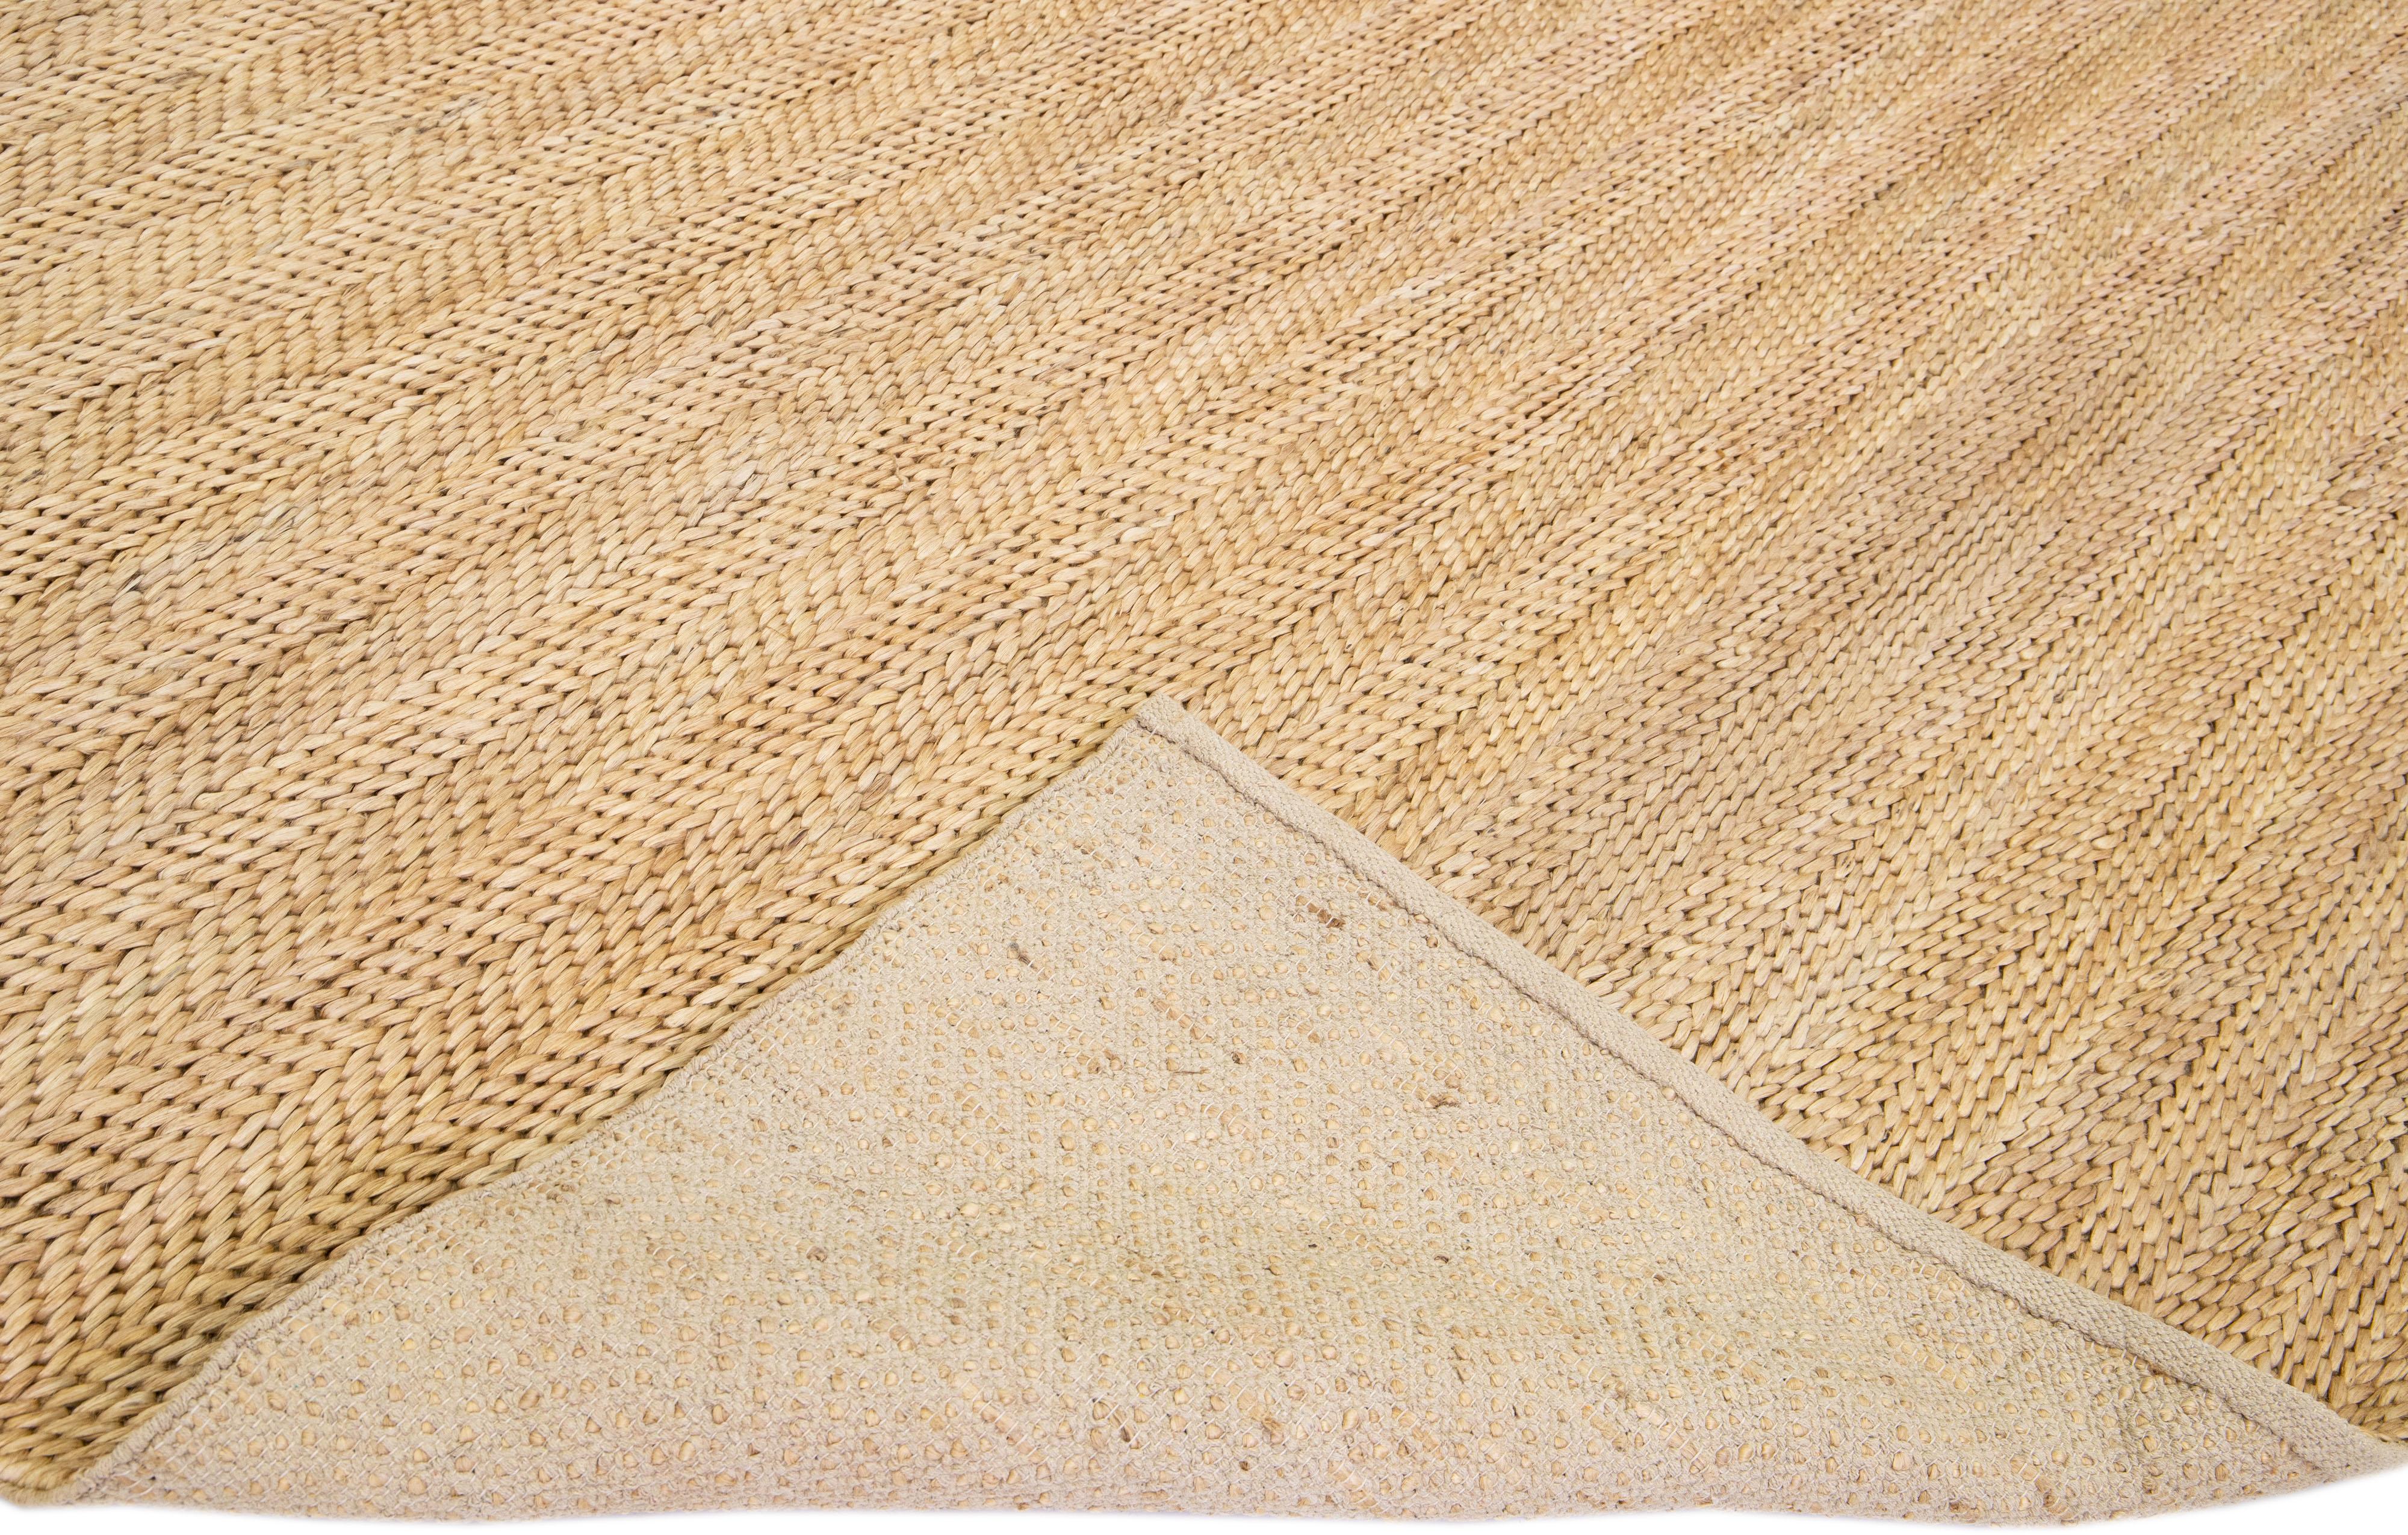 Beautiful natural hand-woven 70% jute and 30% cotton rug with the beige-tan braided field. This Modern rug is perfect for farmhouse, coastal, rustic, bohemian, or contemporary styles of décor. It has a simple solid design that creates subtle shifts